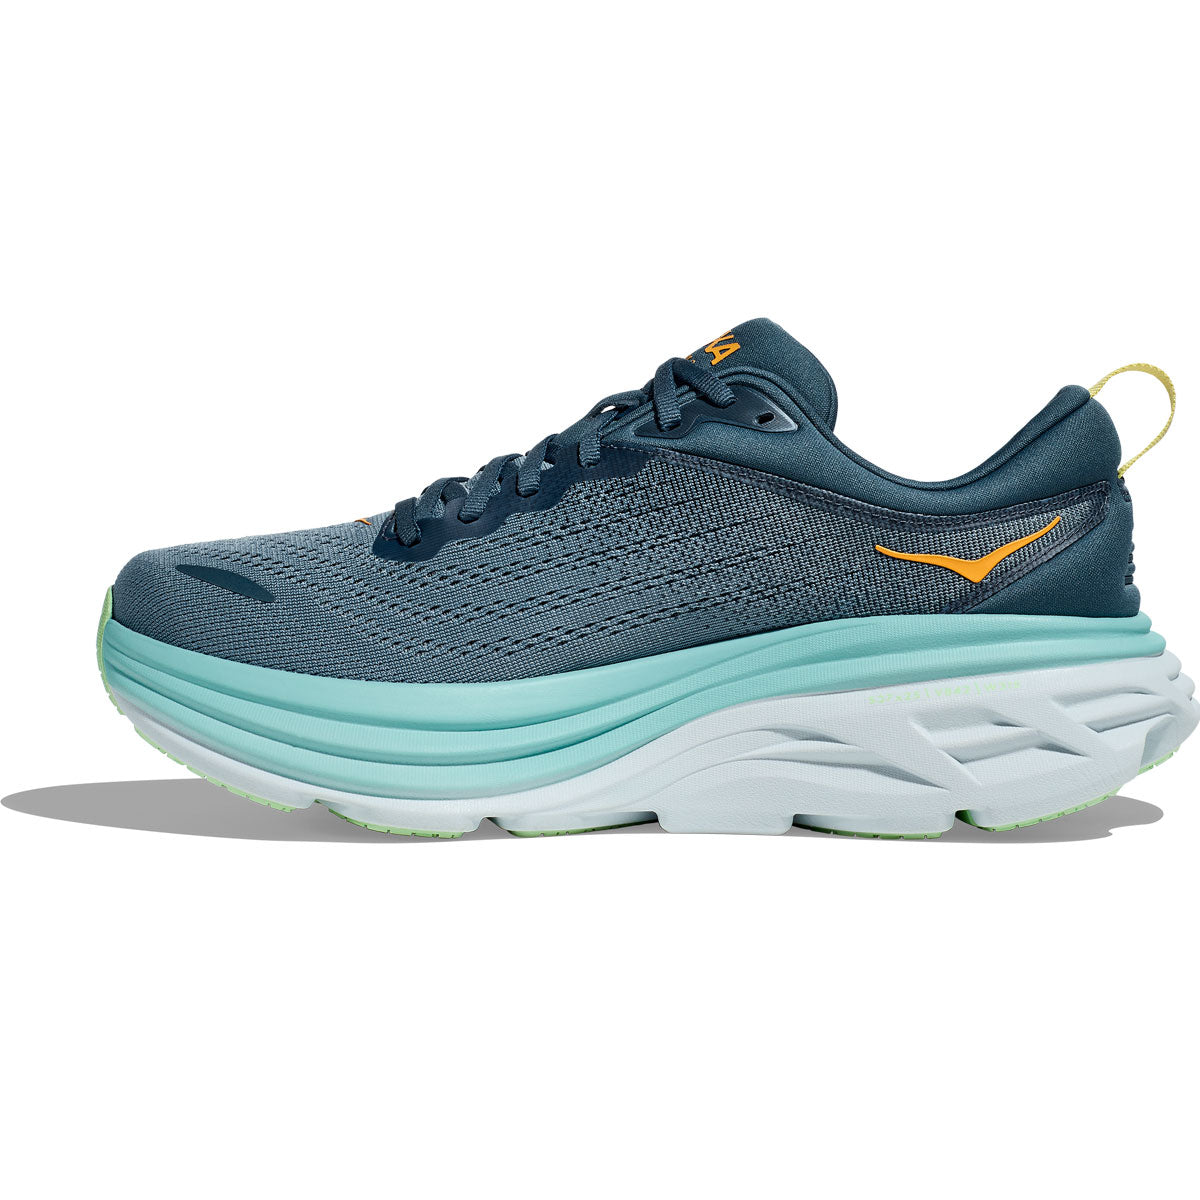 Hoka One One Bondi 8 Wide Fit Running Shoes - Mens - Real Teal/Shadow